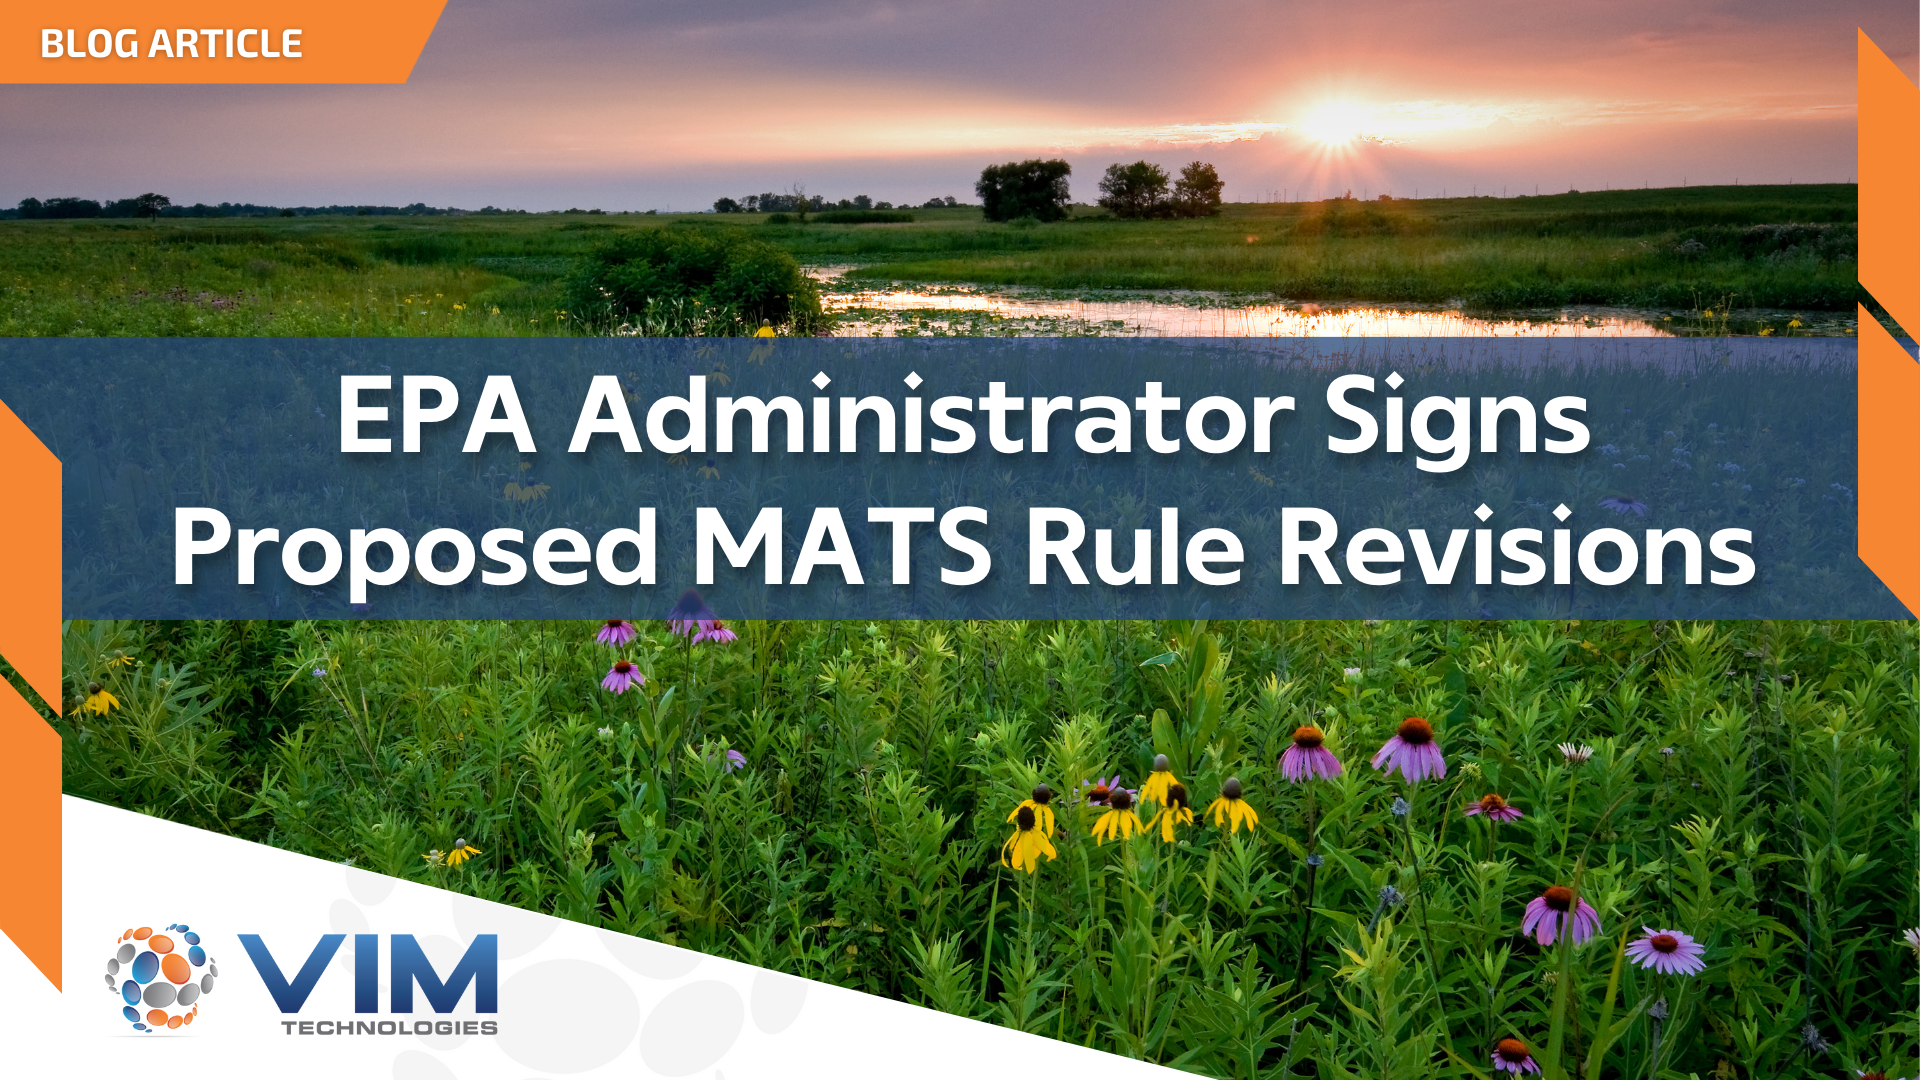 EPA Administrator Signs Proposed MATS Rule Revisions